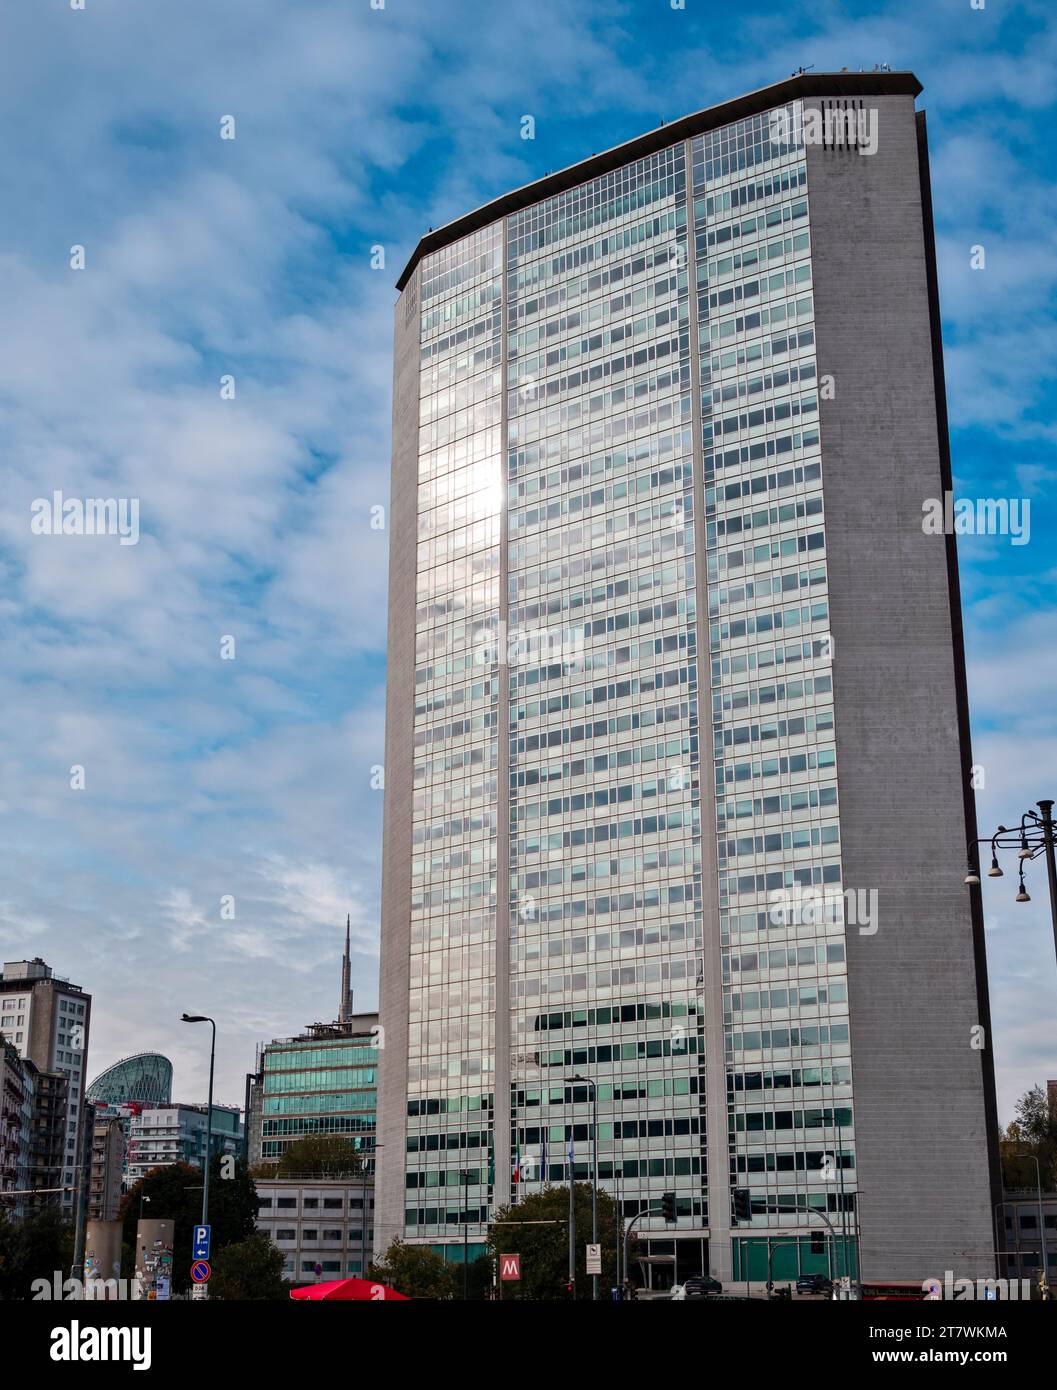 Pirelli skyscraper, view of the Lombardy region building seen from Milan's central station square. Italy Stock Photo